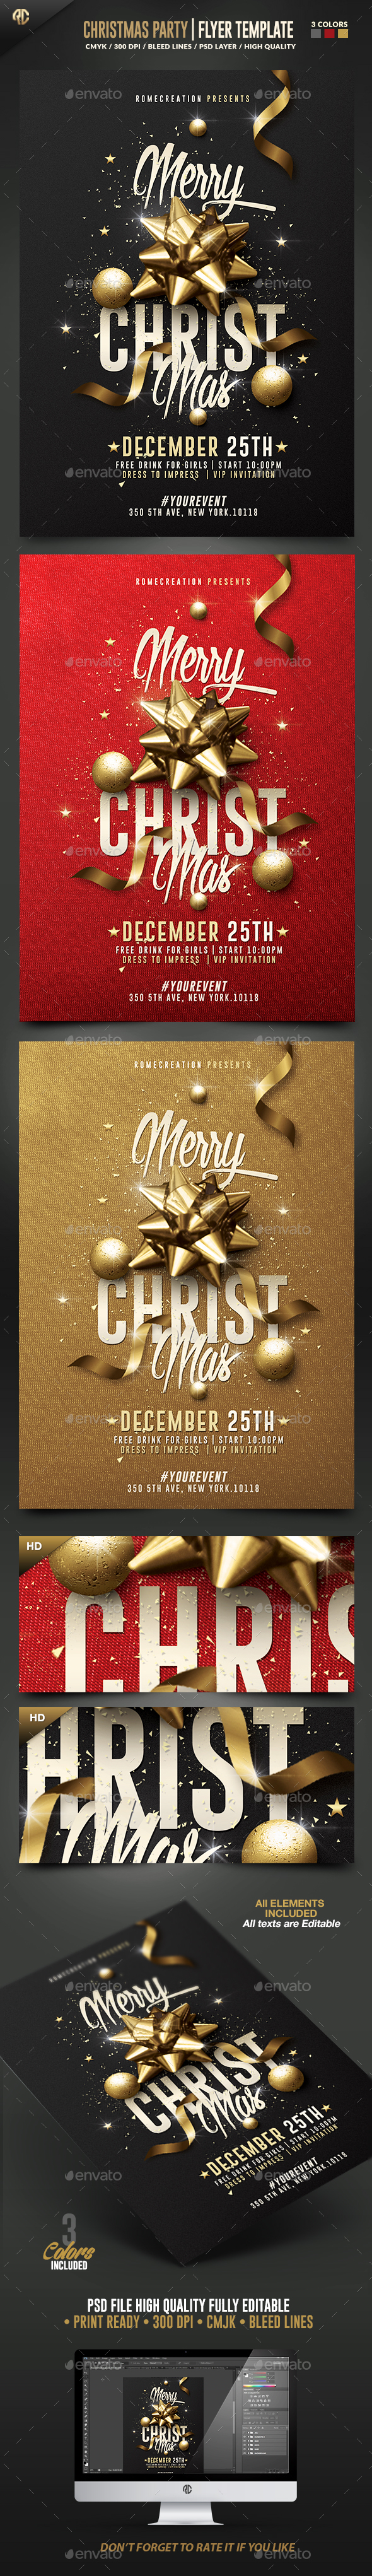 Classy Christmas Party | Psd Flyer Template